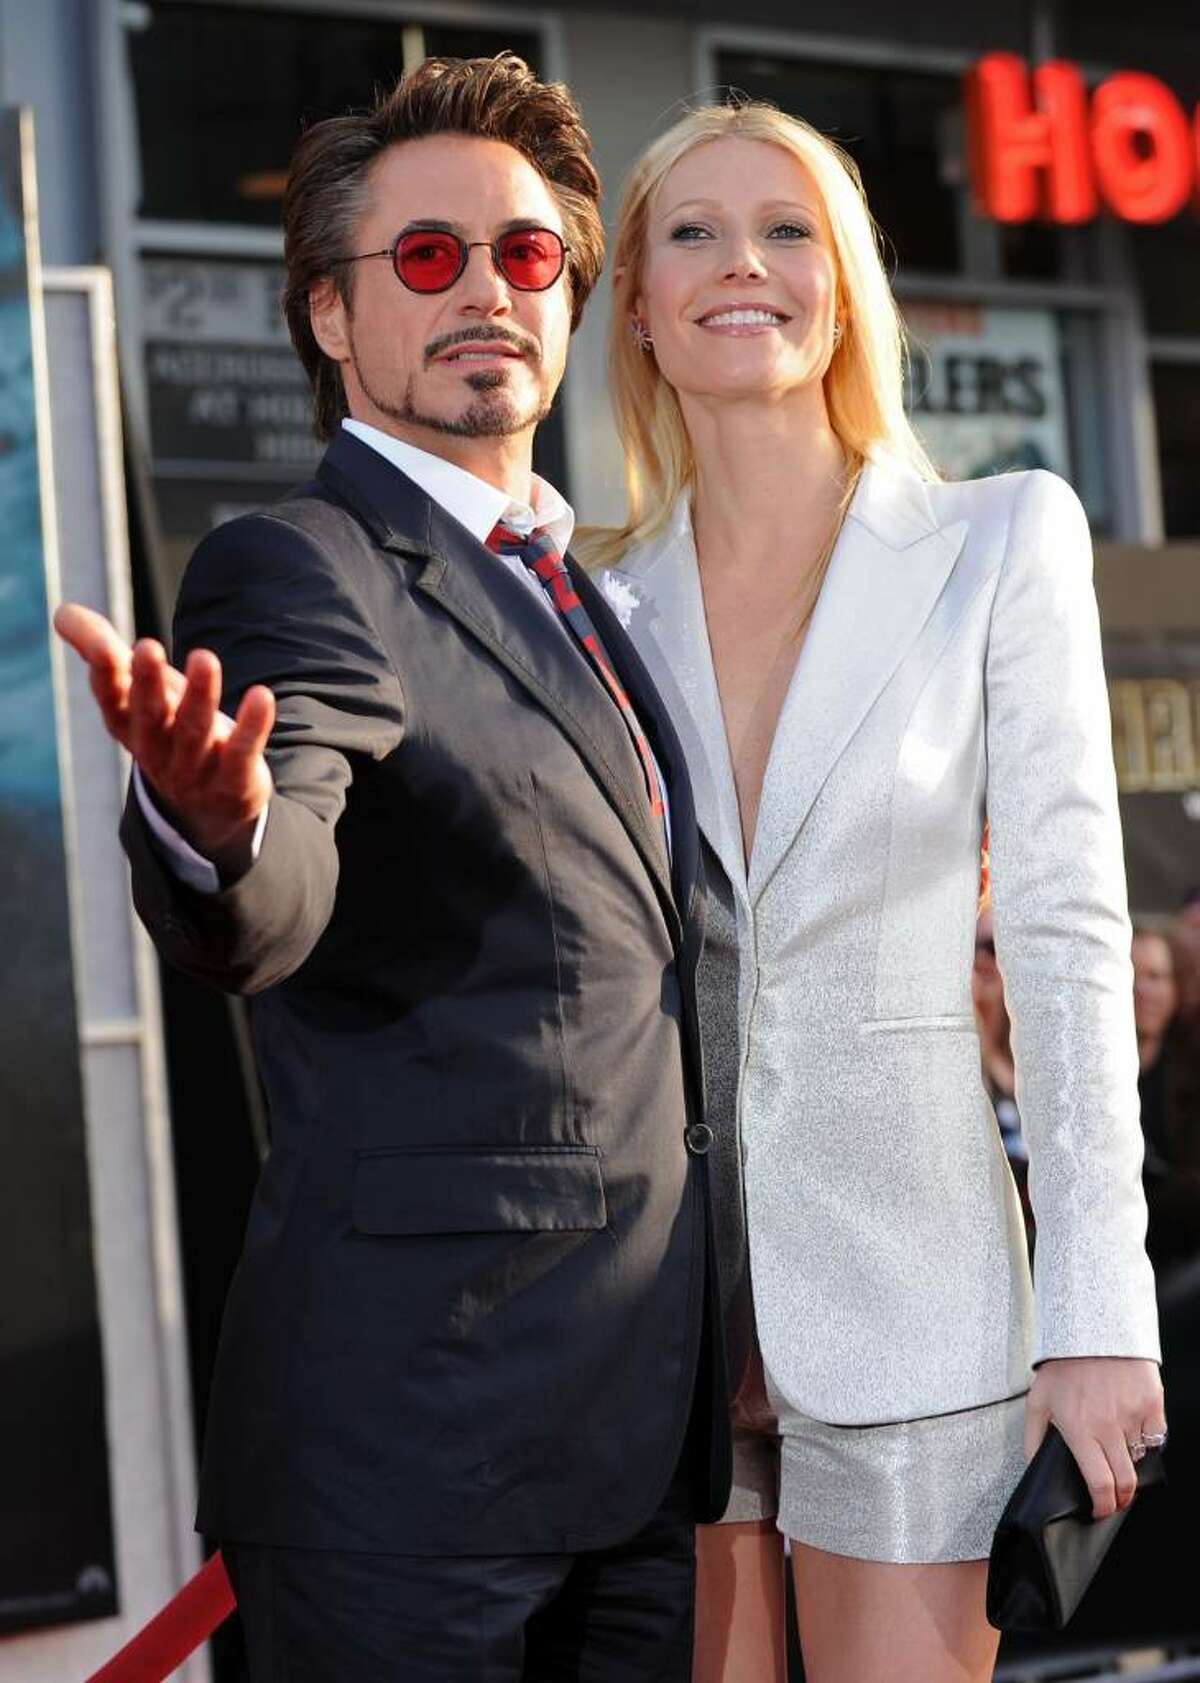 HOLLYWOOD - APRIL 26: Actor Robert Downey Jr. and actress Gwyneth Paltrow arrive at the world premiere of Paramount Pictures and Marvel Entertainment's "Iron Man 2” held at El Capitan Theatre on April 26, 2010 in Hollywood, California. (Photo by Kevin Winter/Getty Images) *** Local Caption *** Robert Downey Jr.;Gwyneth Paltrow